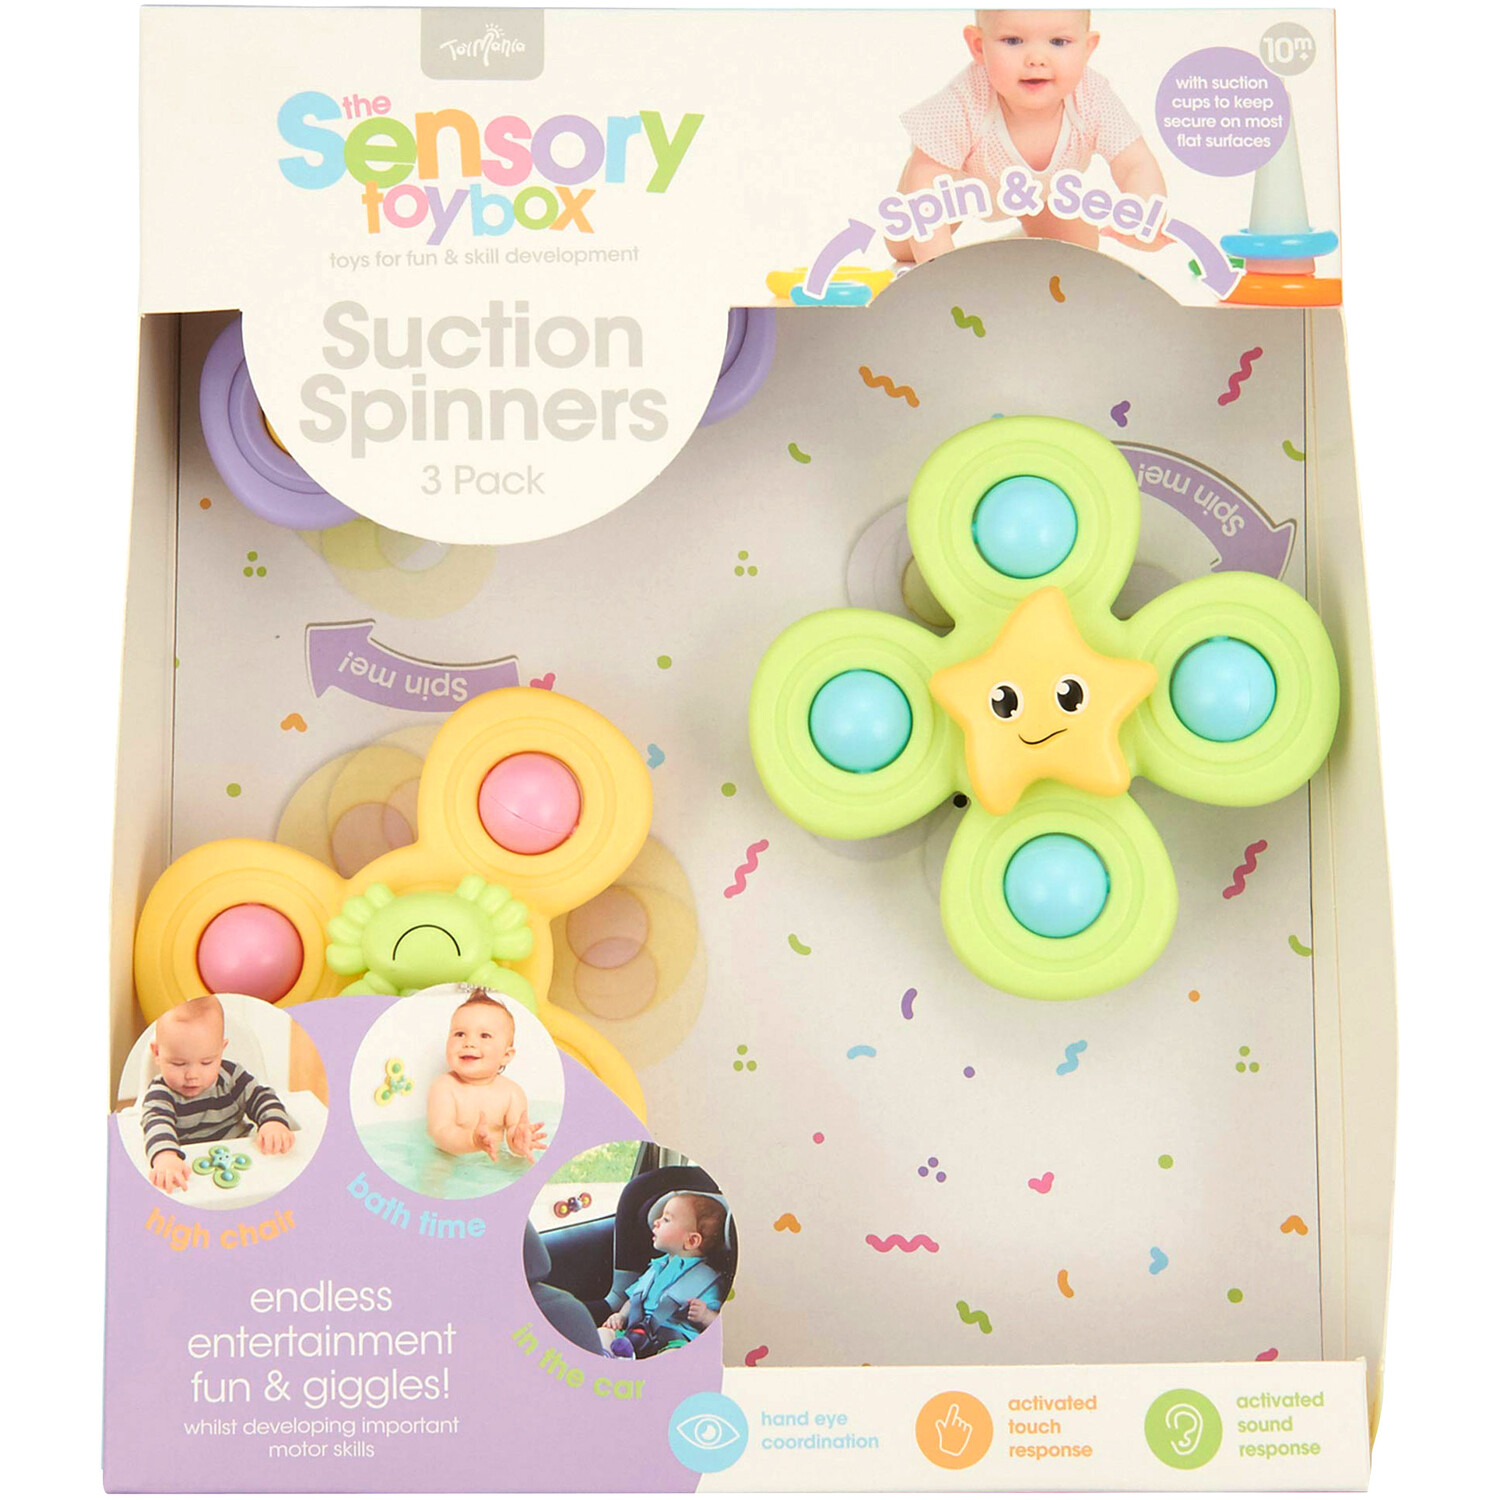 ToyMania Suction Spinners Bath Toy 3 Pack Image 1